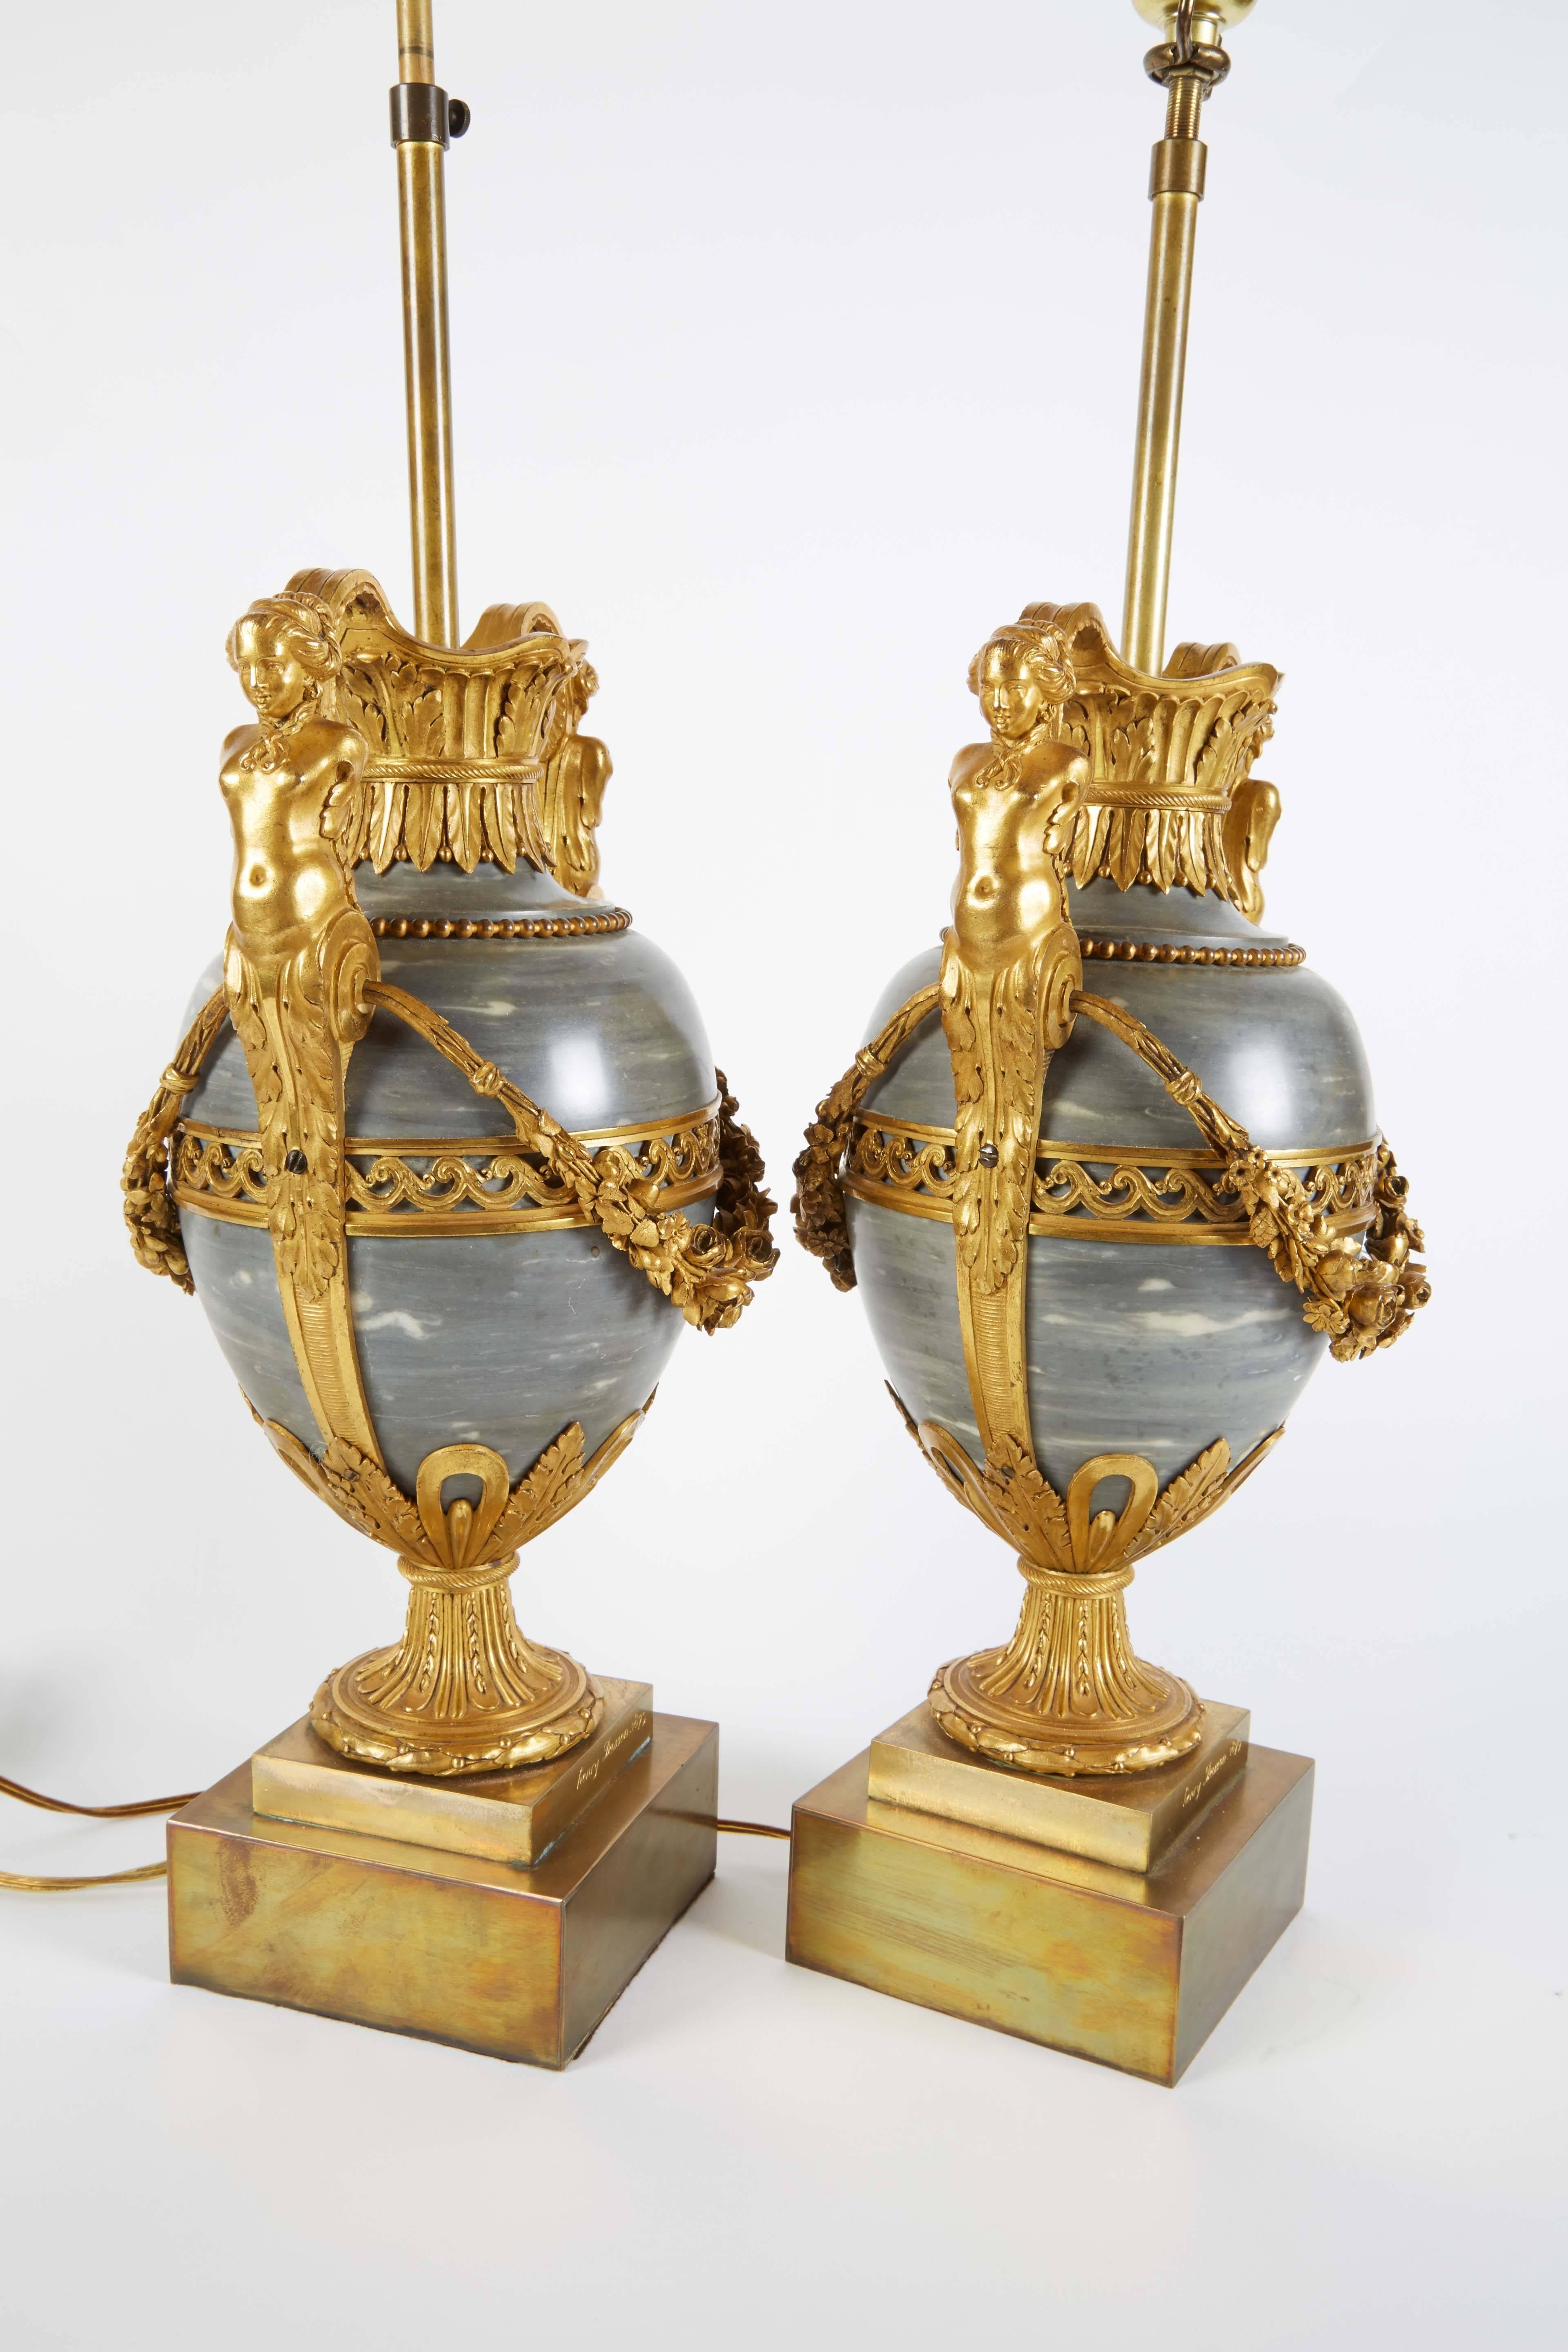 Pair of French Ormolu-Mounted Bleu Turquin Marble Lamps Vases by Henry Dasson 1